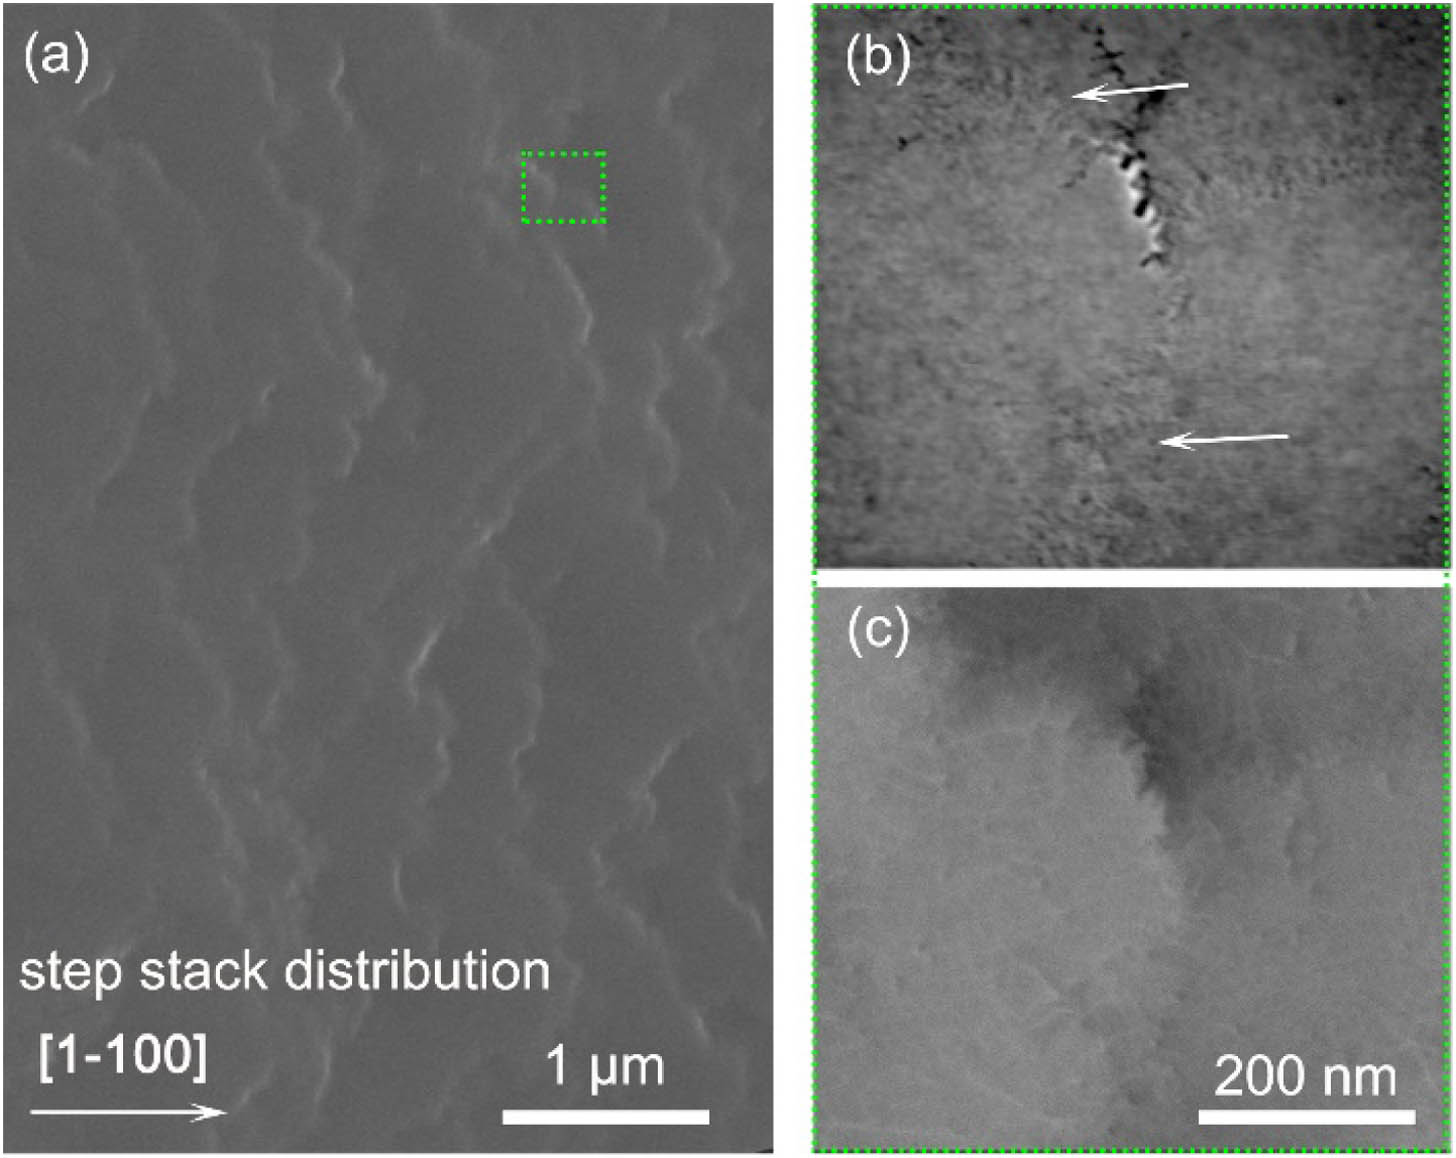 (a) Top view SEM image of the surface of UV LED; (b) zoom-in view image near the step edge as indicated by the green box and (c) corresponding ECCI graph.